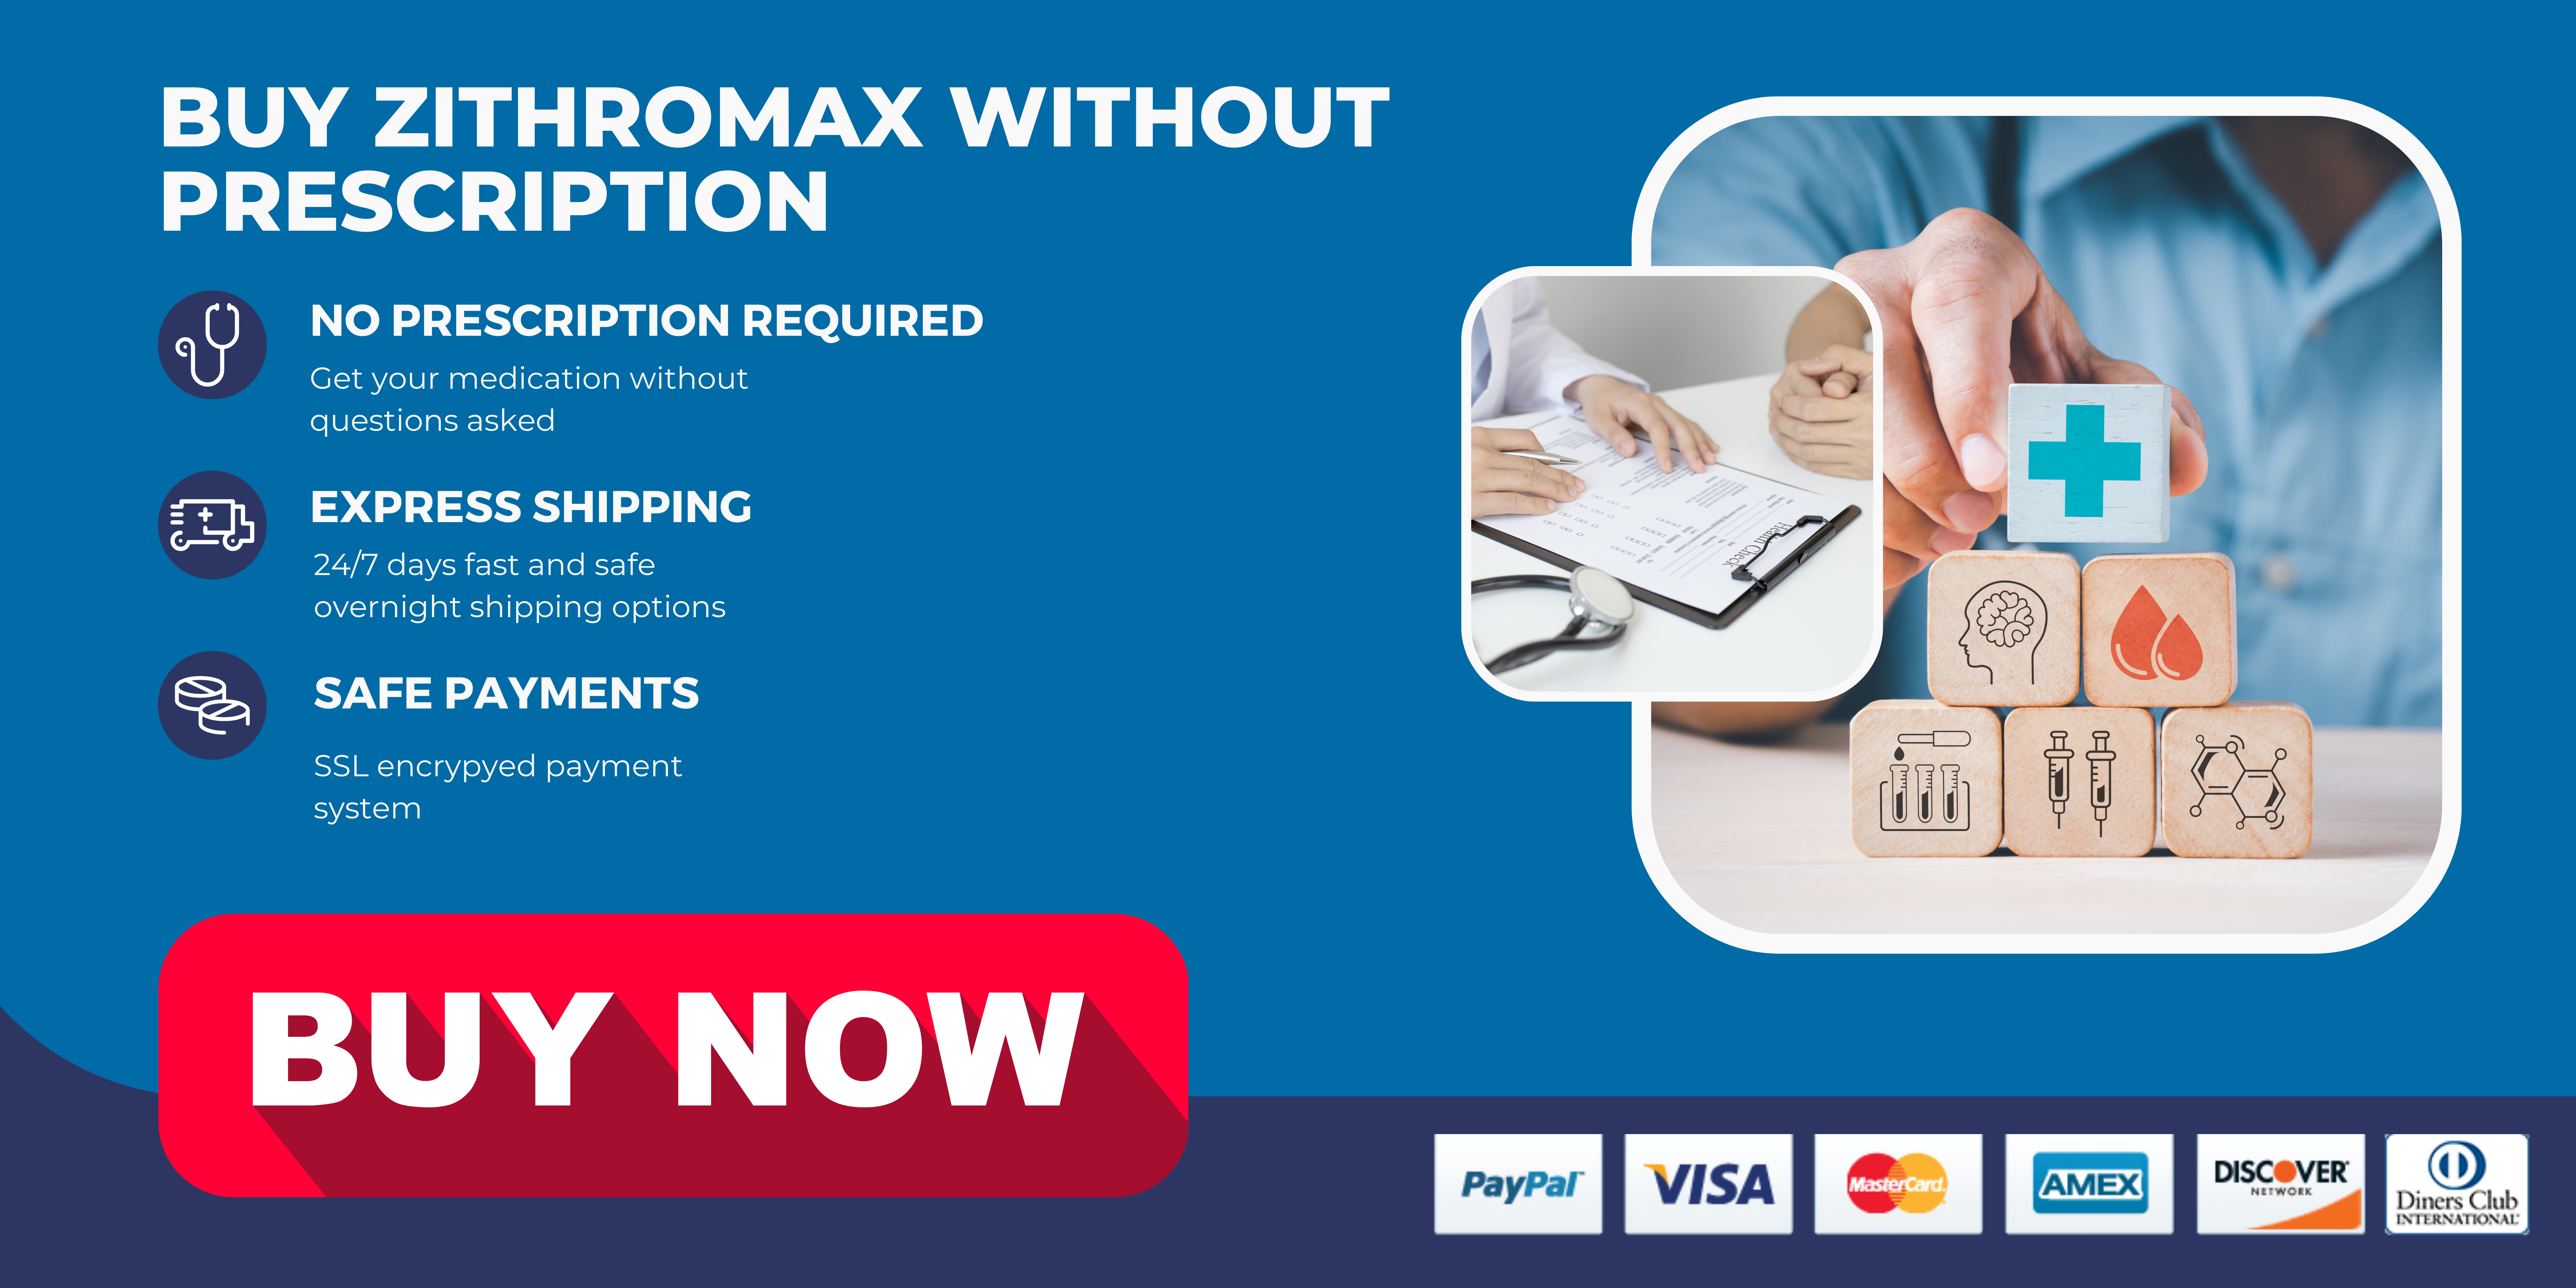 Buy zithromax without prescription